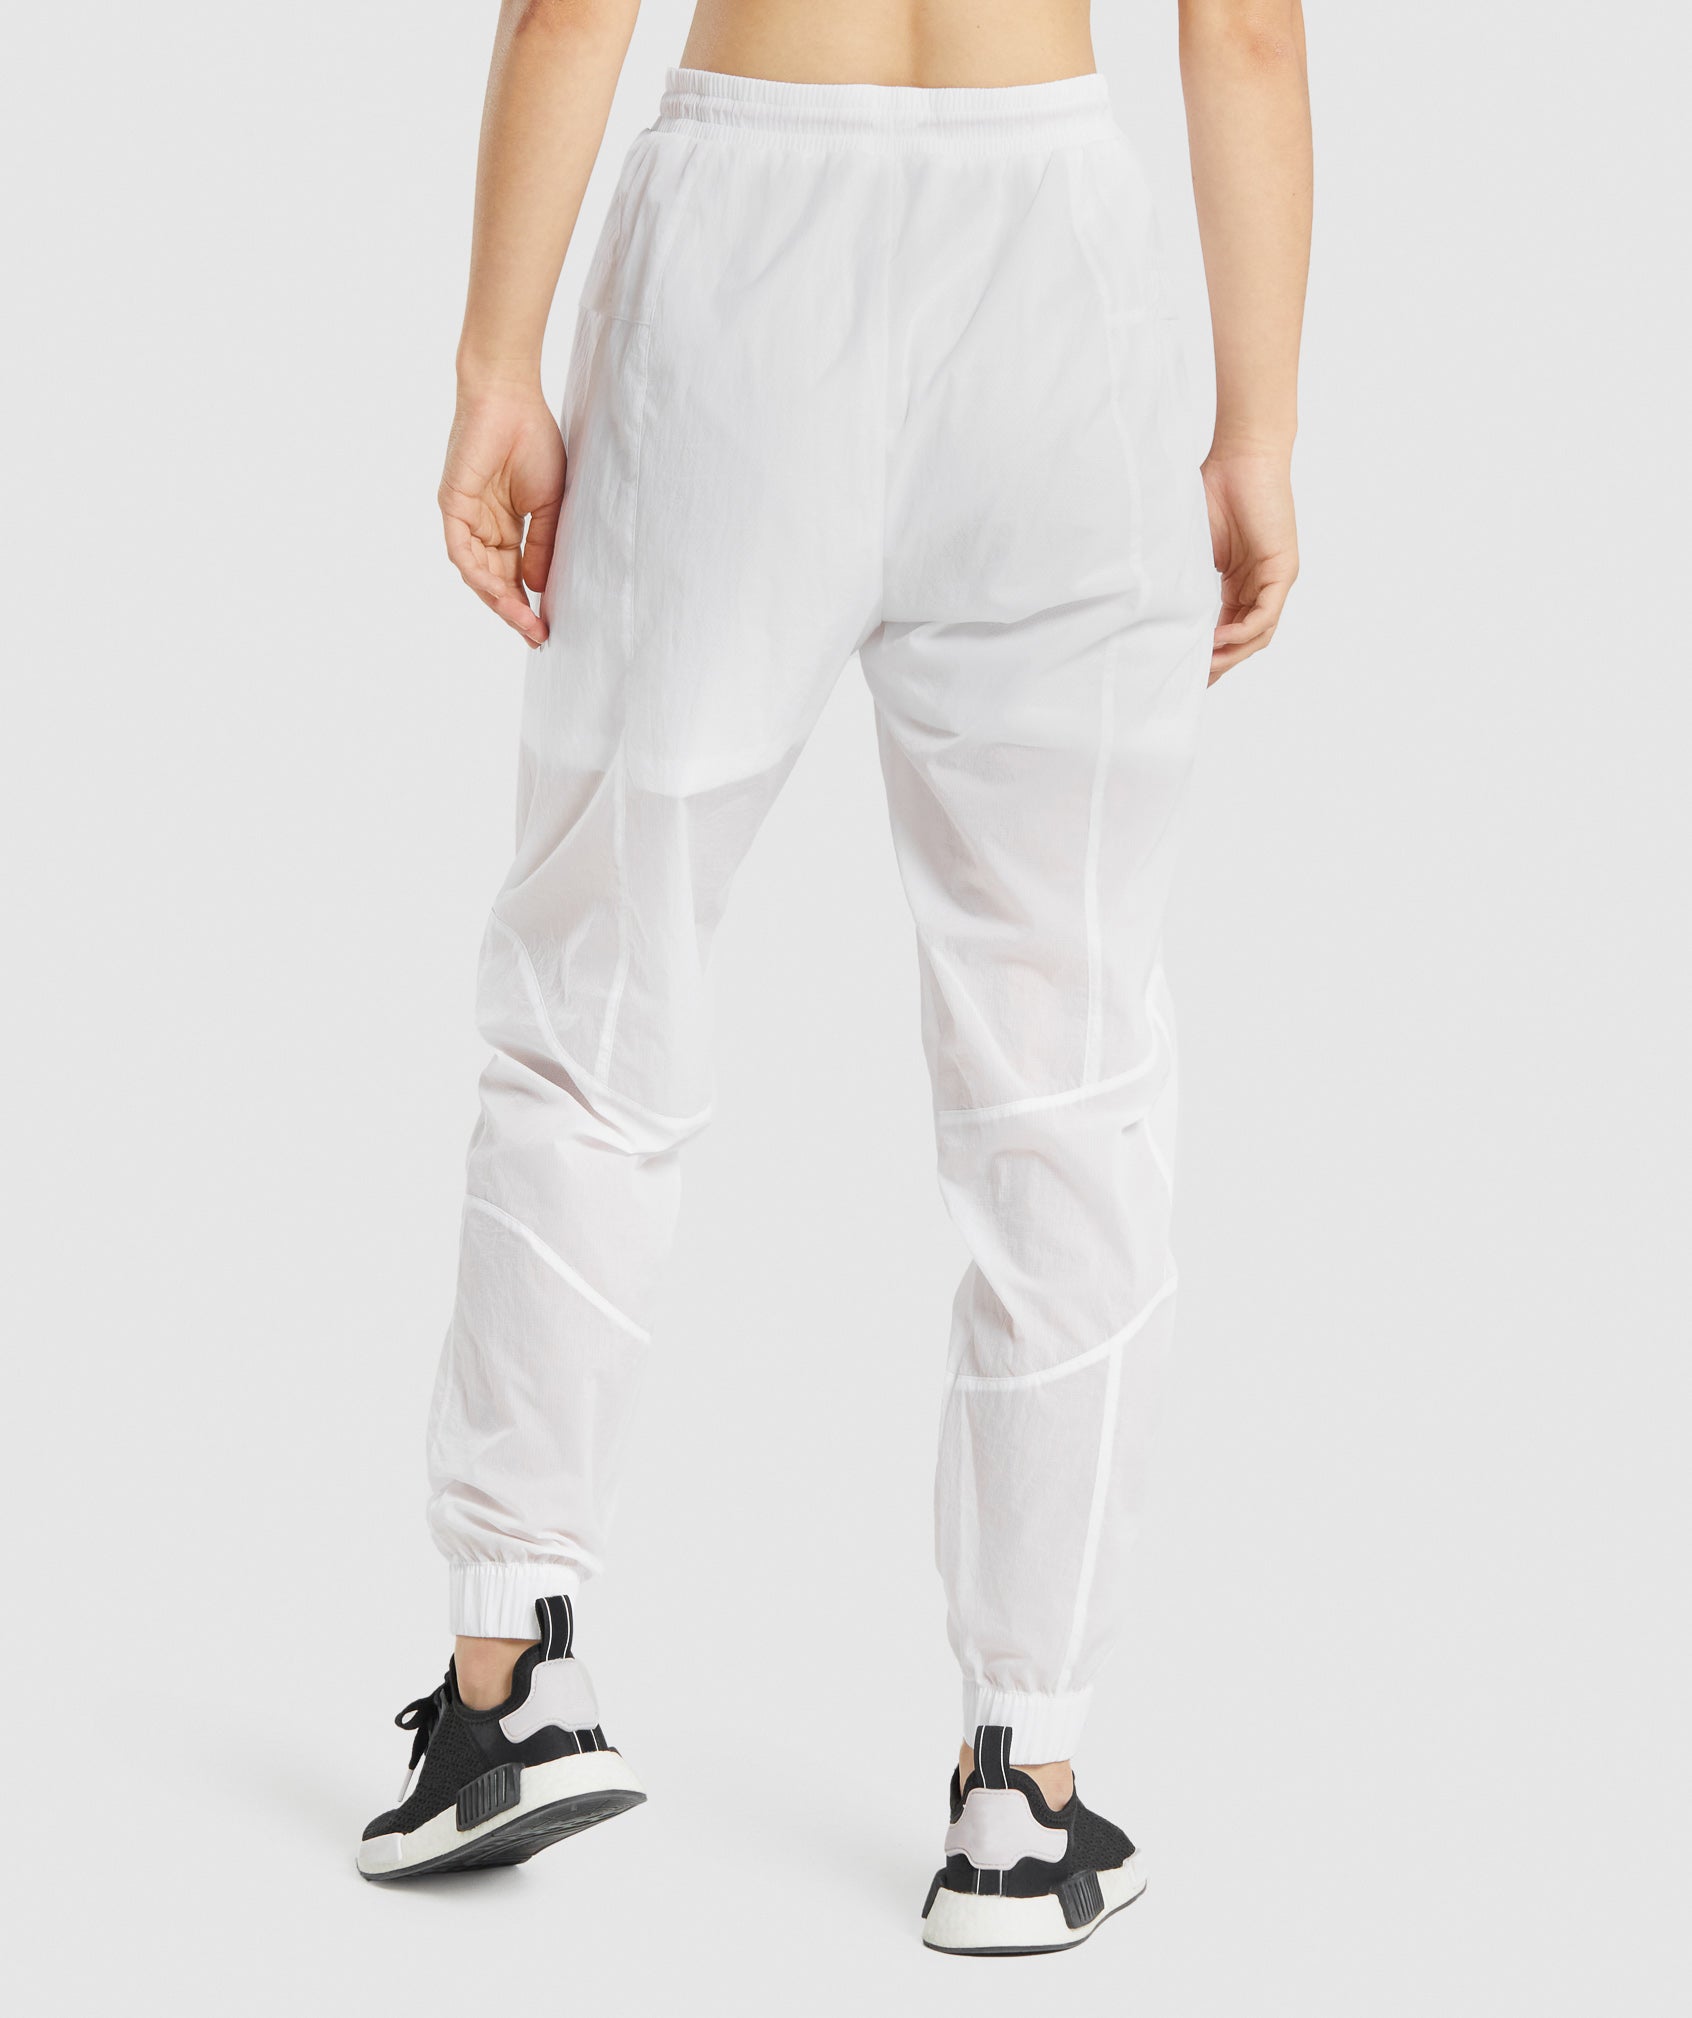 Pulse Woven Joggers in White - view 3